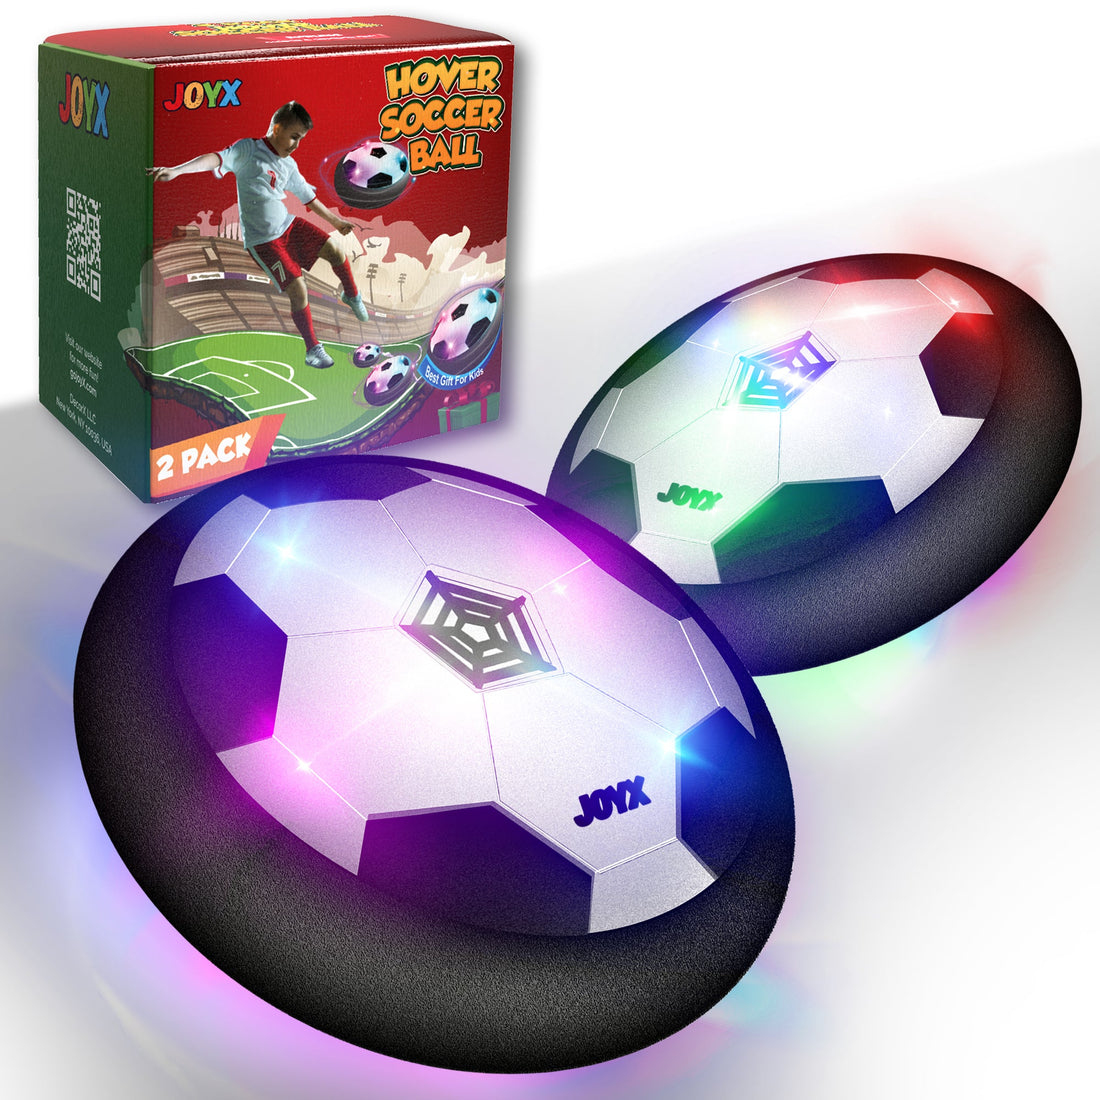 Why choose Air Hover Soccer Balls Toys for Kids?